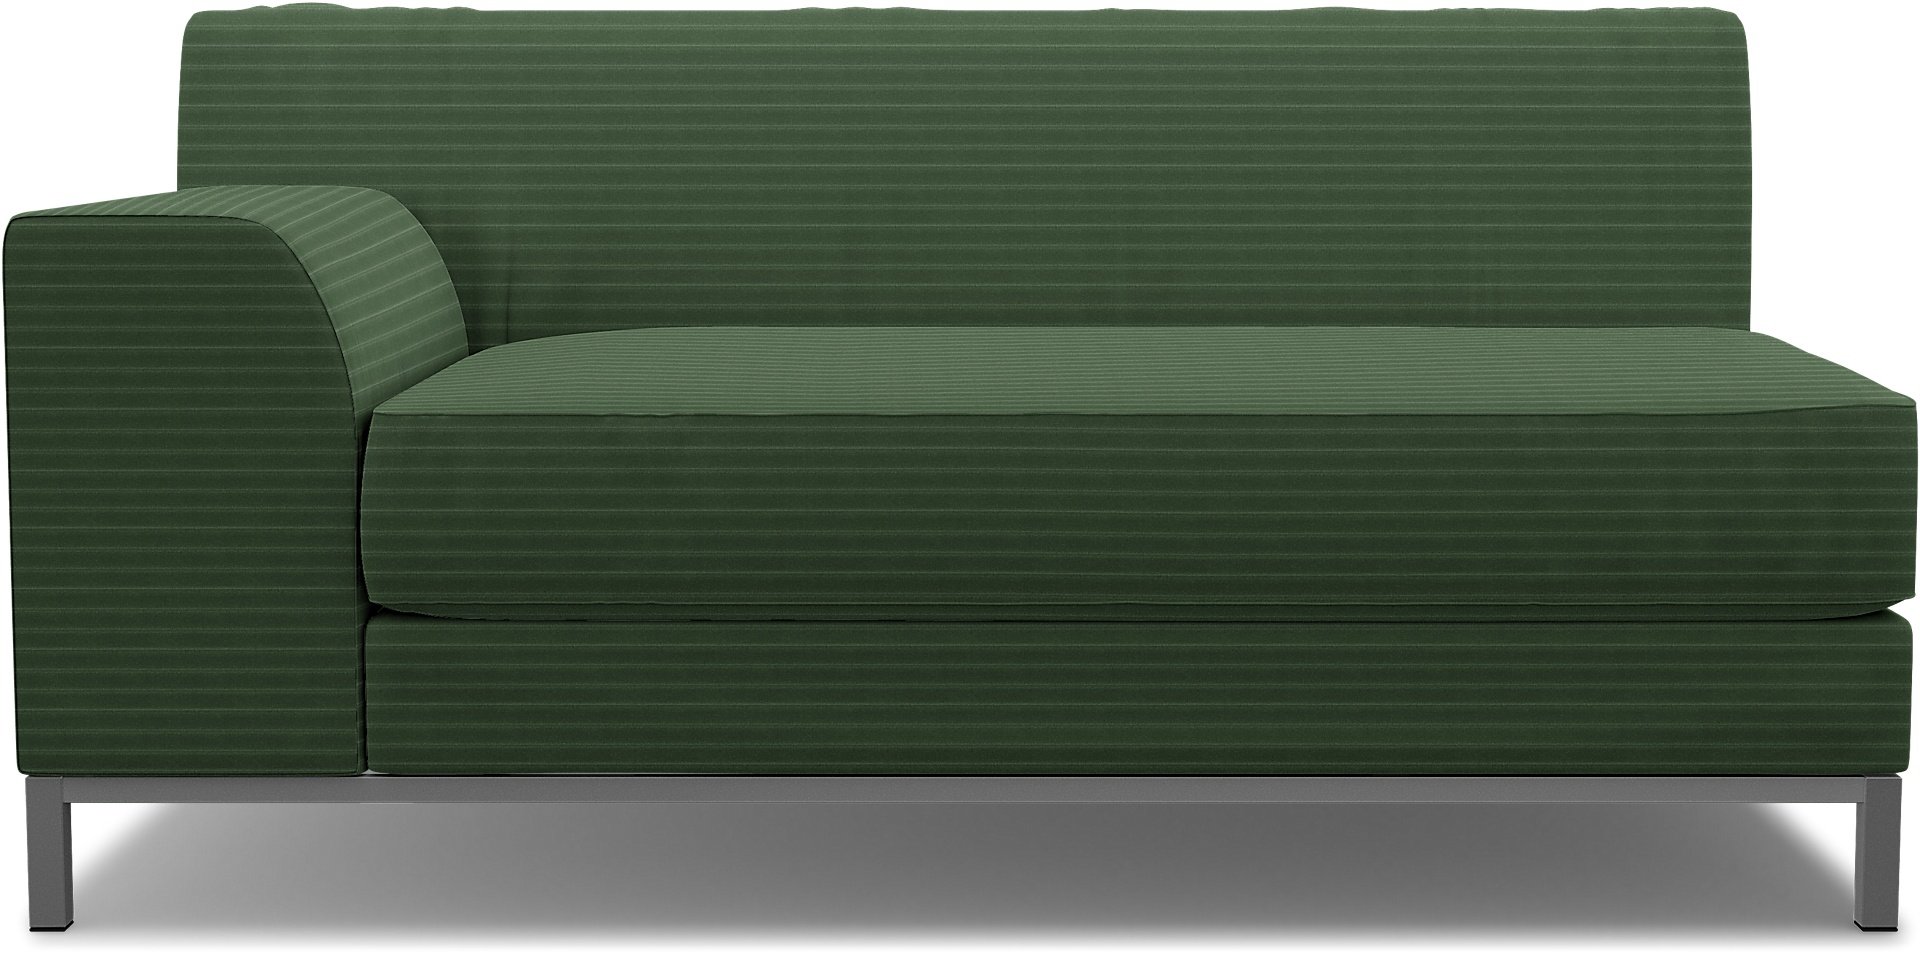 IKEA - Kramfors 2 Seater Sofa with Left Arm Cover, Palm Green, Corduroy - Bemz